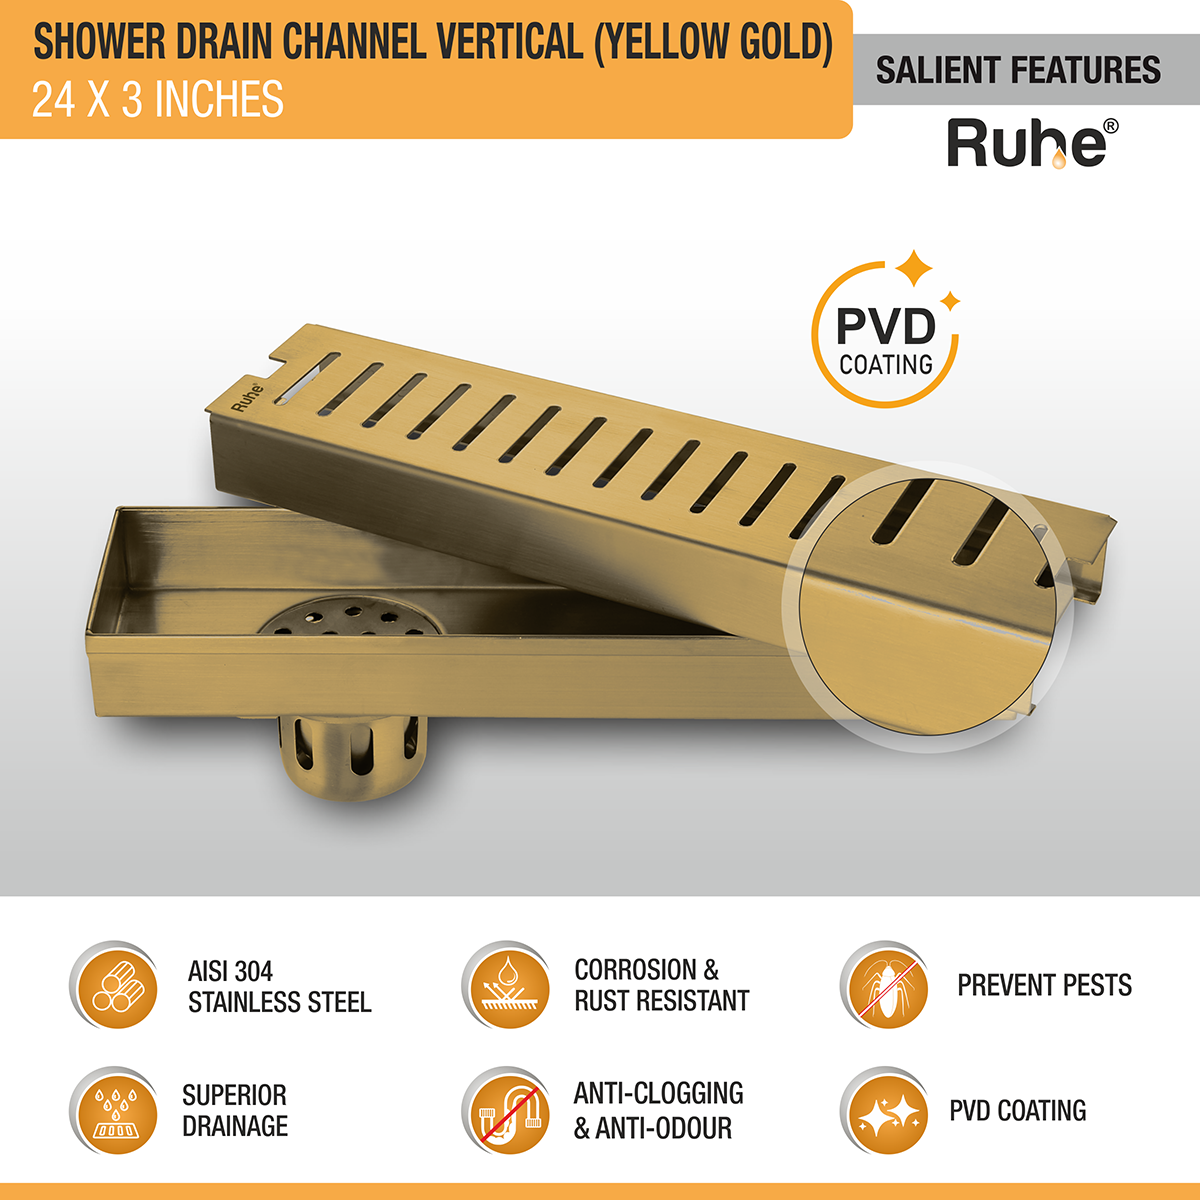 Vertical Shower Drain Channel (24 x 3 Inches) YELLOW GOLD features